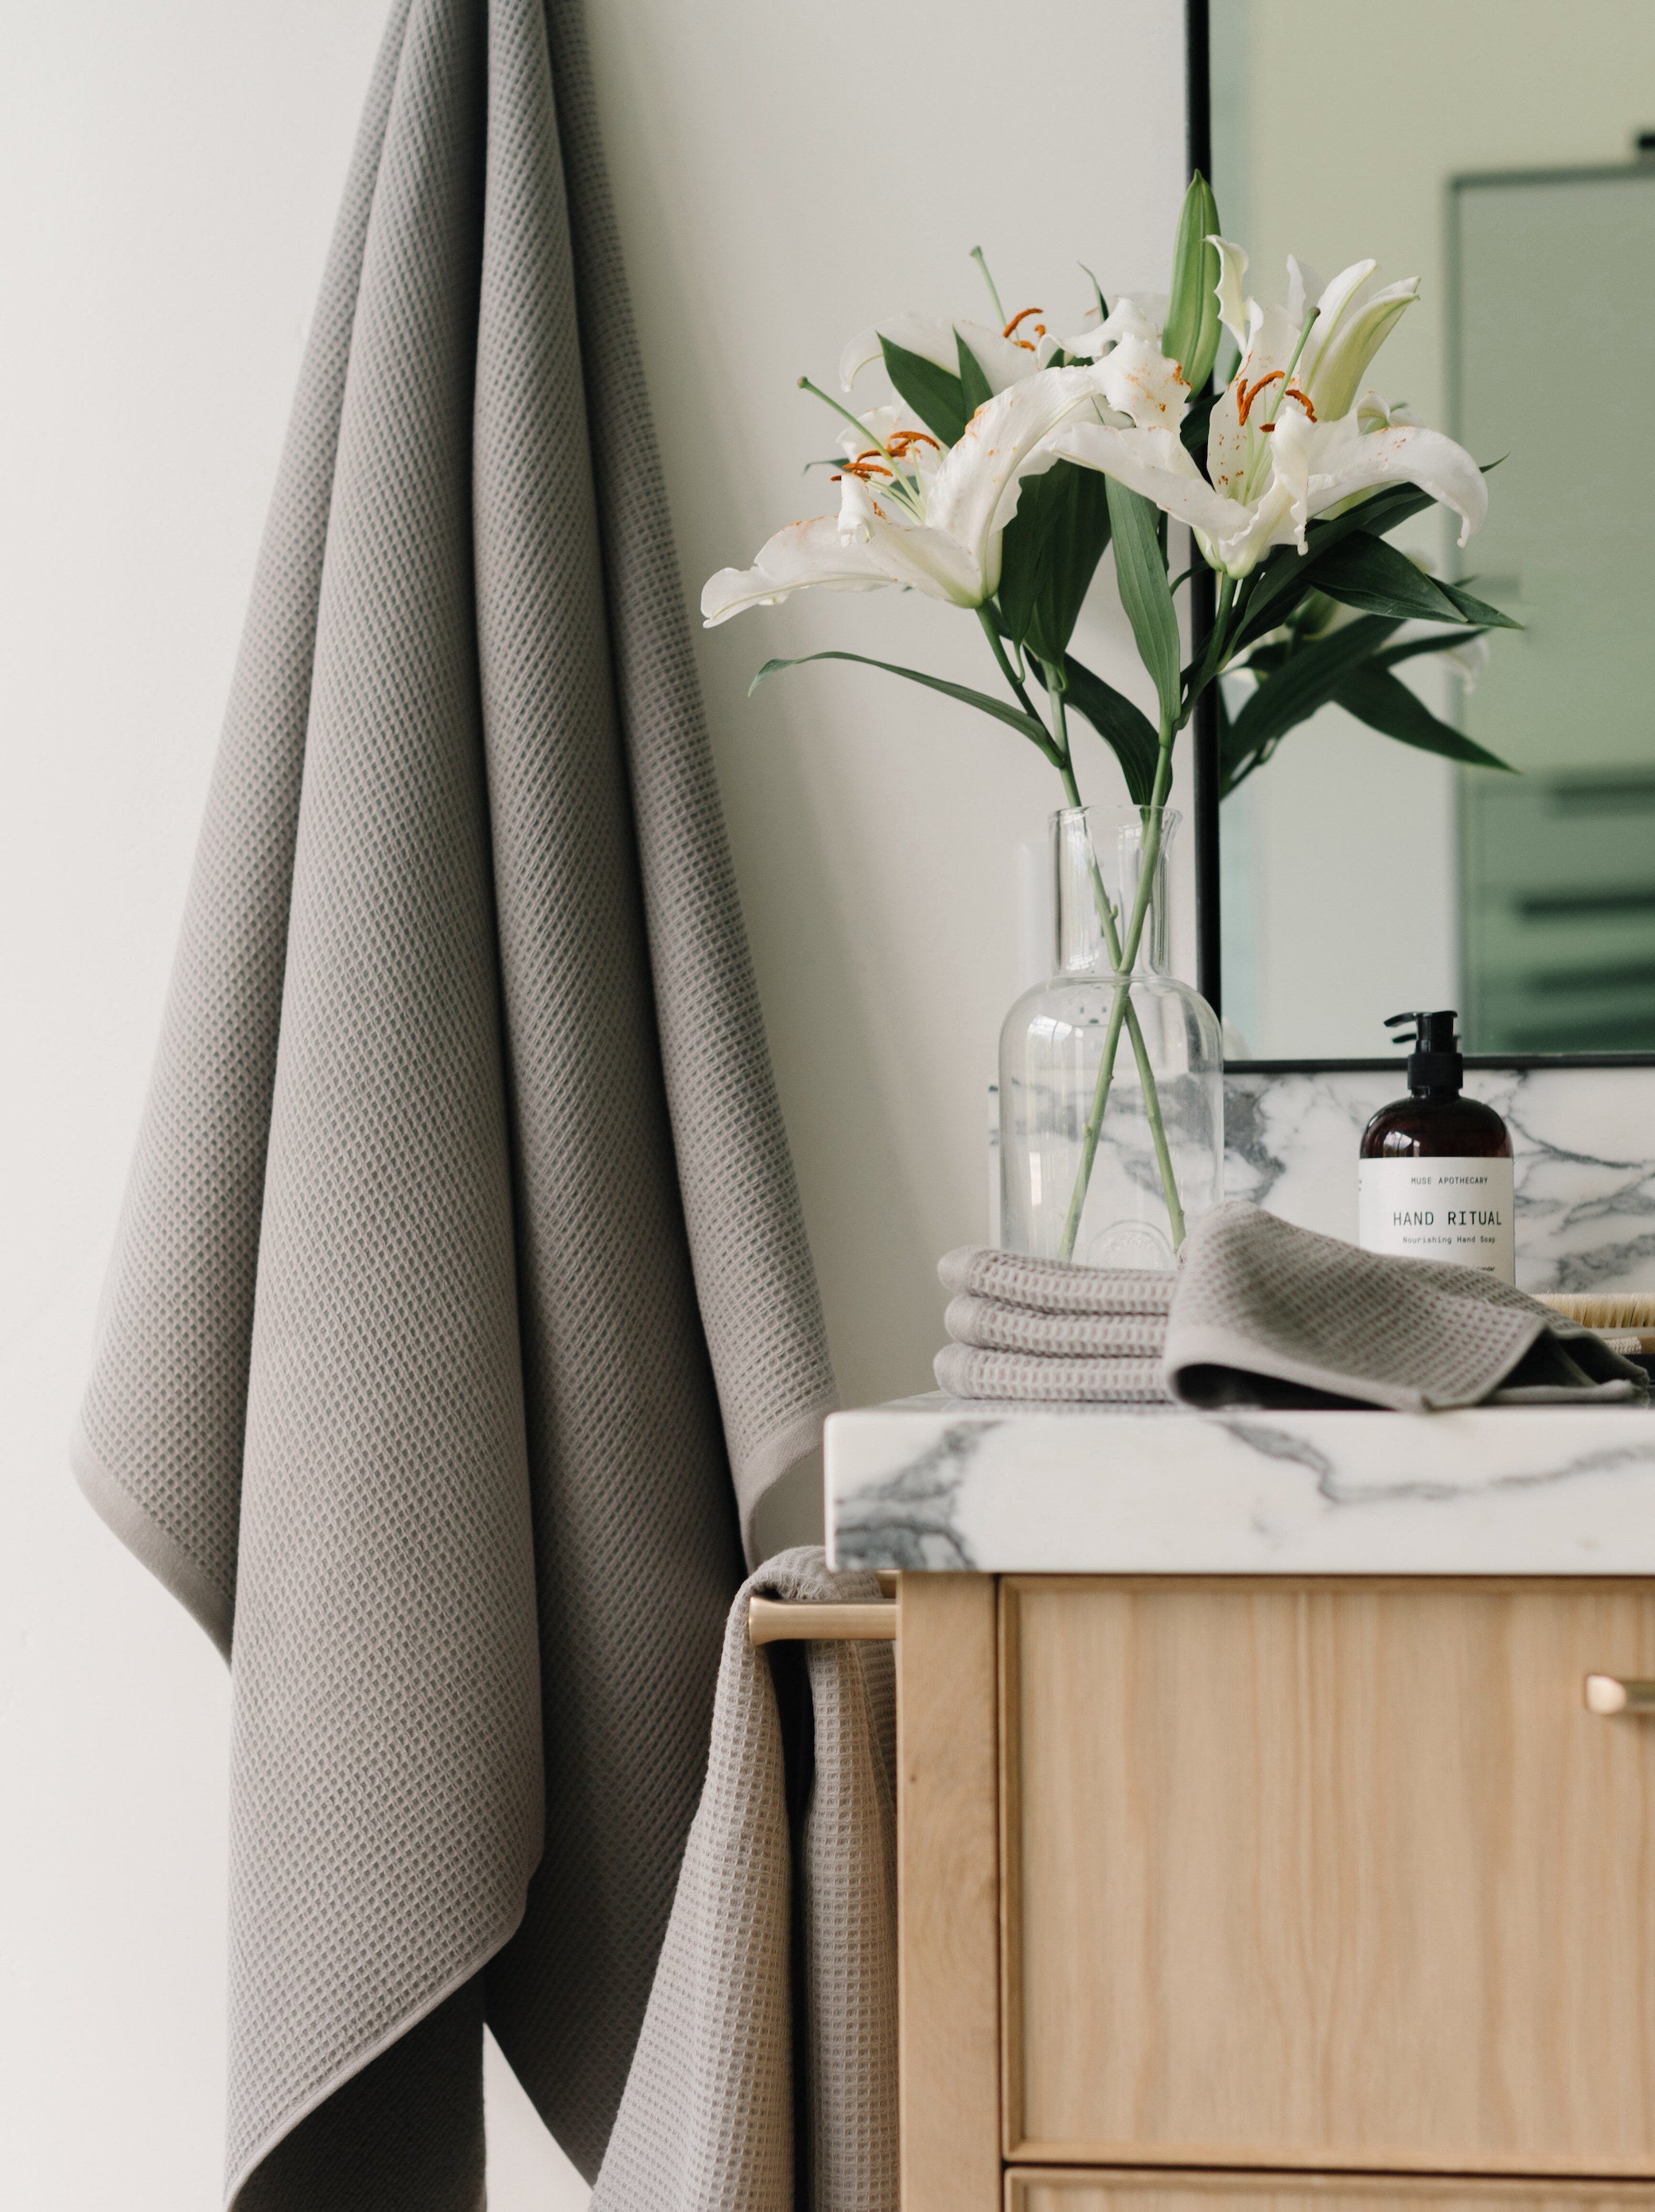 Waffle Bath Towel in the color Charcoal. Photo of Charcoal Waffle Bath Towel taken with Charcoal Waffle Bath Towel hanging from towel hook in a bathroom with white walls |Color:Charcoal